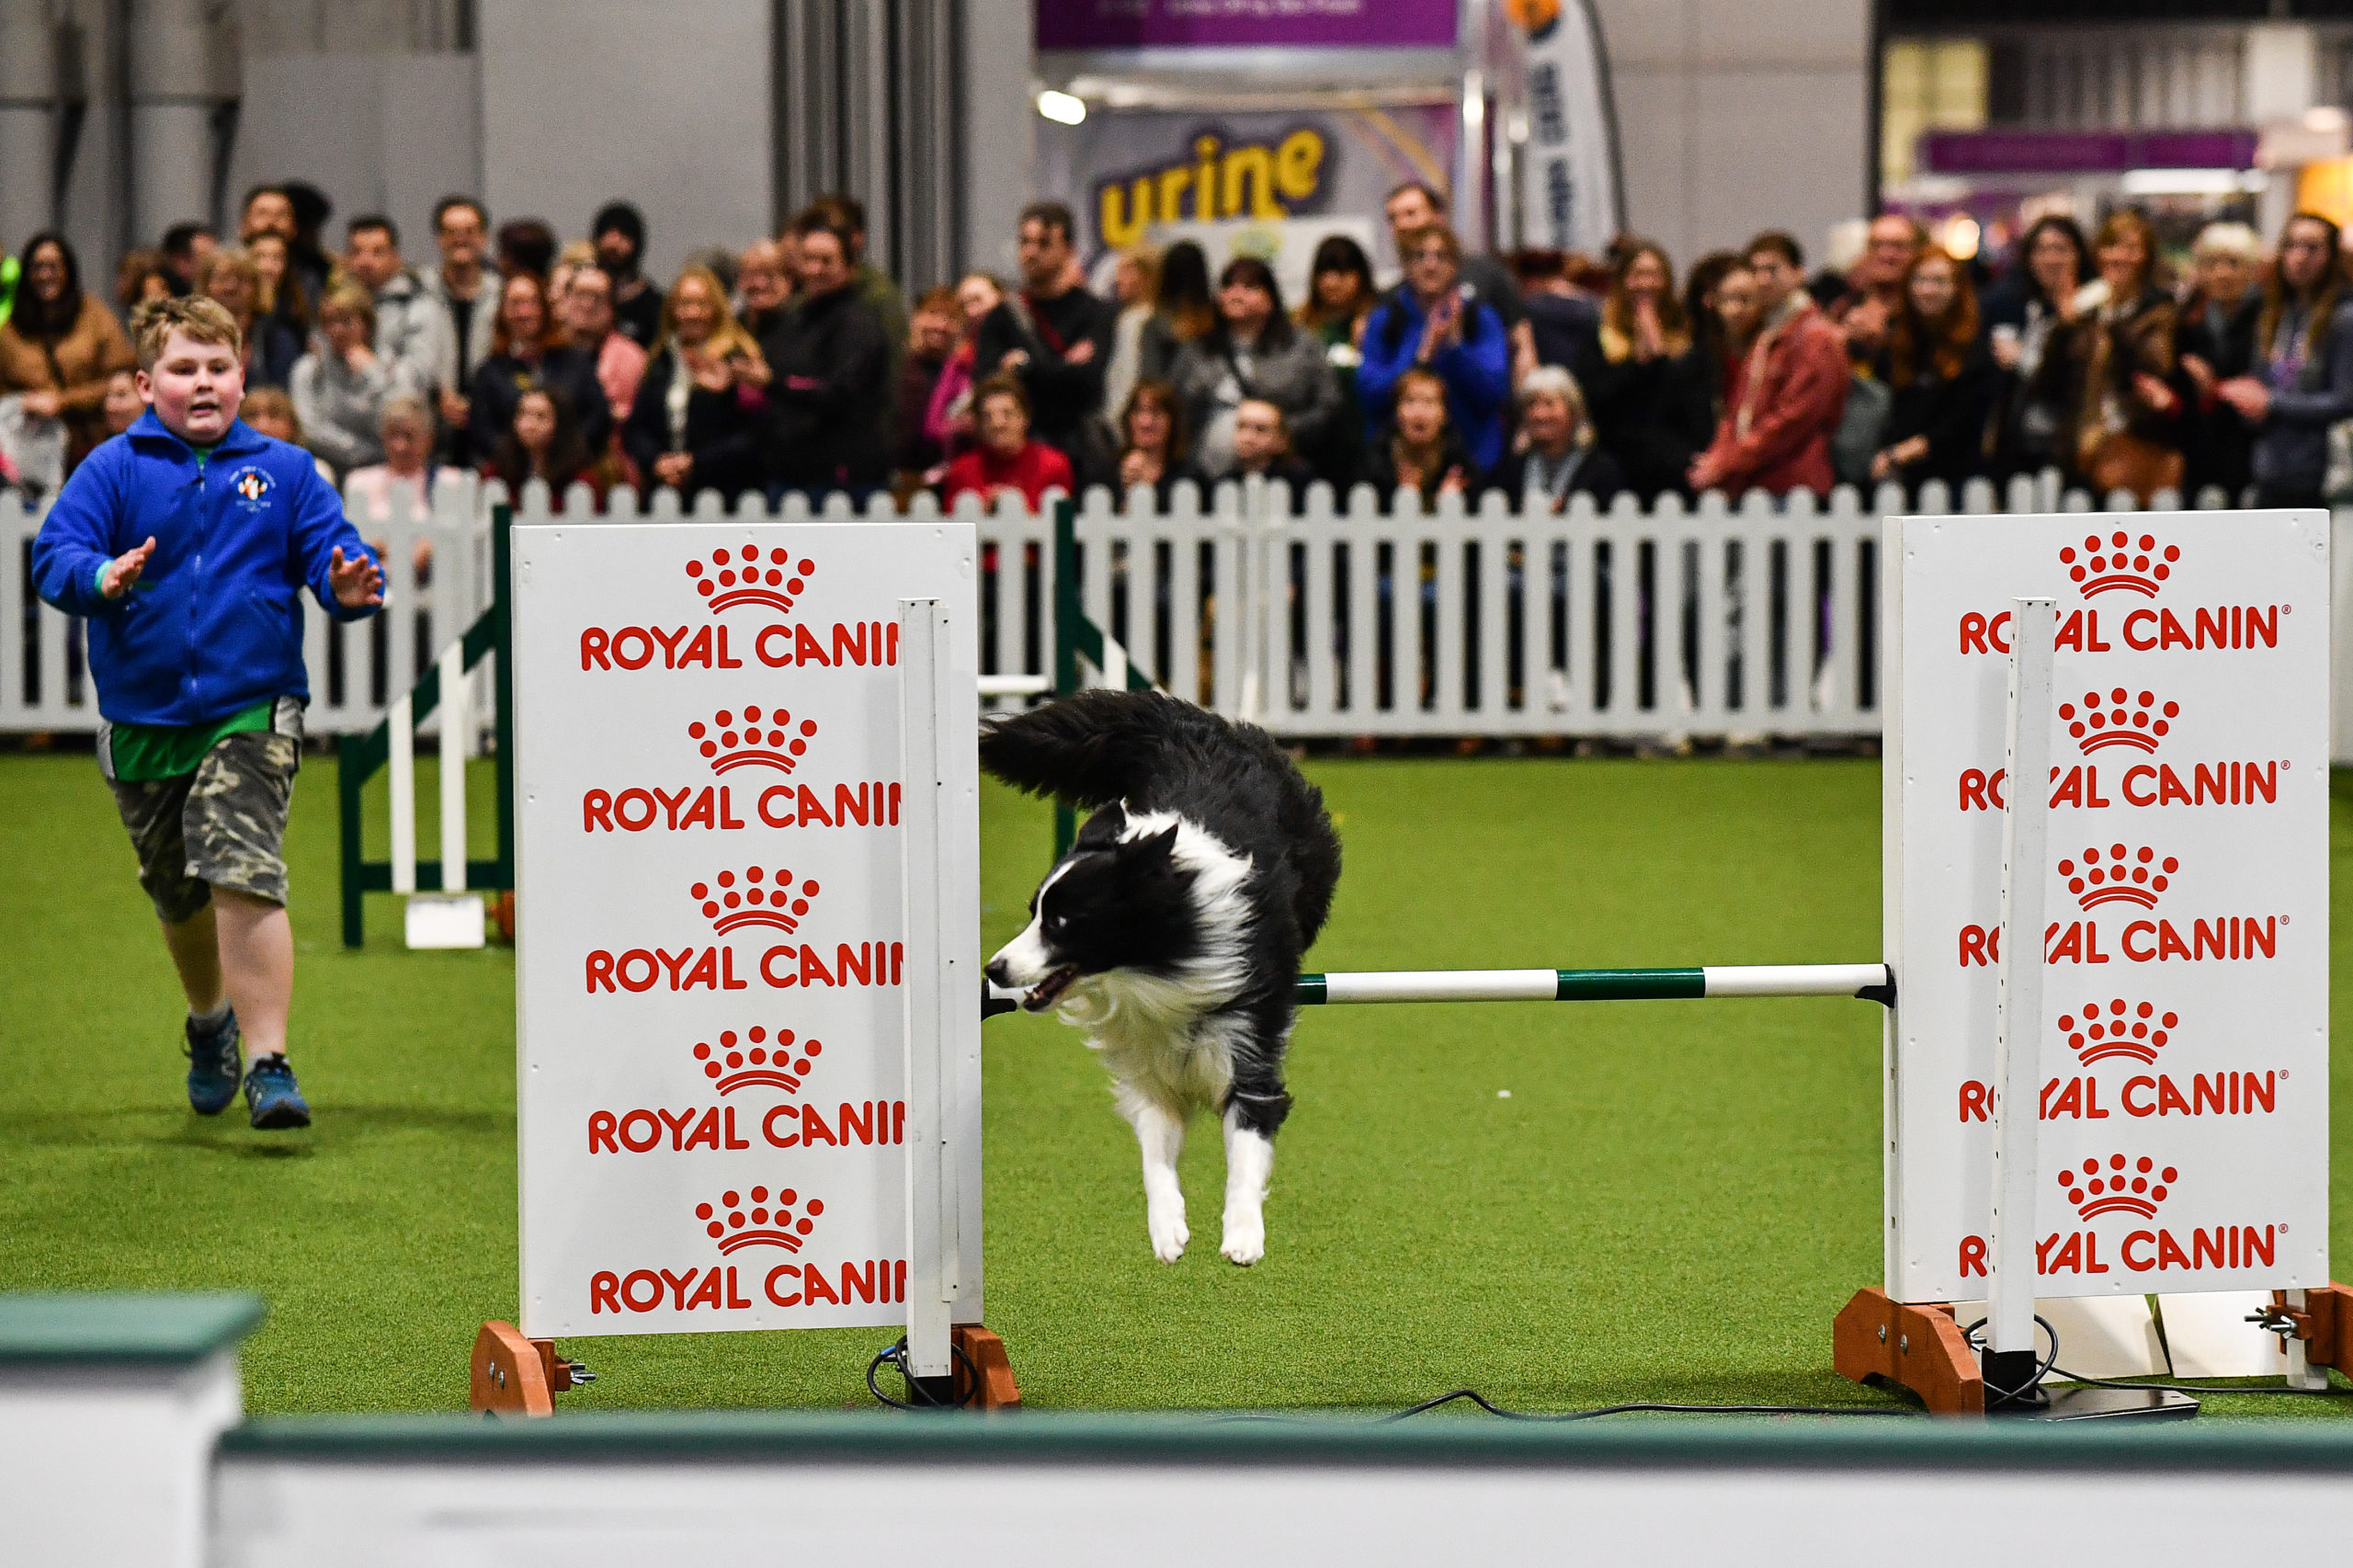 A Border Collie leaps a jump during the agility section on one of Crufts 2020 at the National Exhibition Centre on March 5, 2020 in Birmingham, England. Crufts, the world’s biggest dog show got under way this morning. The annual event has restrictions in place due to the coronavirus outbreak however is still expected to attract thousands of dogs and their owners to the four day event. Royal Canin, a petfood company and one of the dog show’s major sponsors, advised its representatives to stay away from large events like Crufts "unless it is business critical.”(Photo by Jeff J Mitchell/Getty Images)